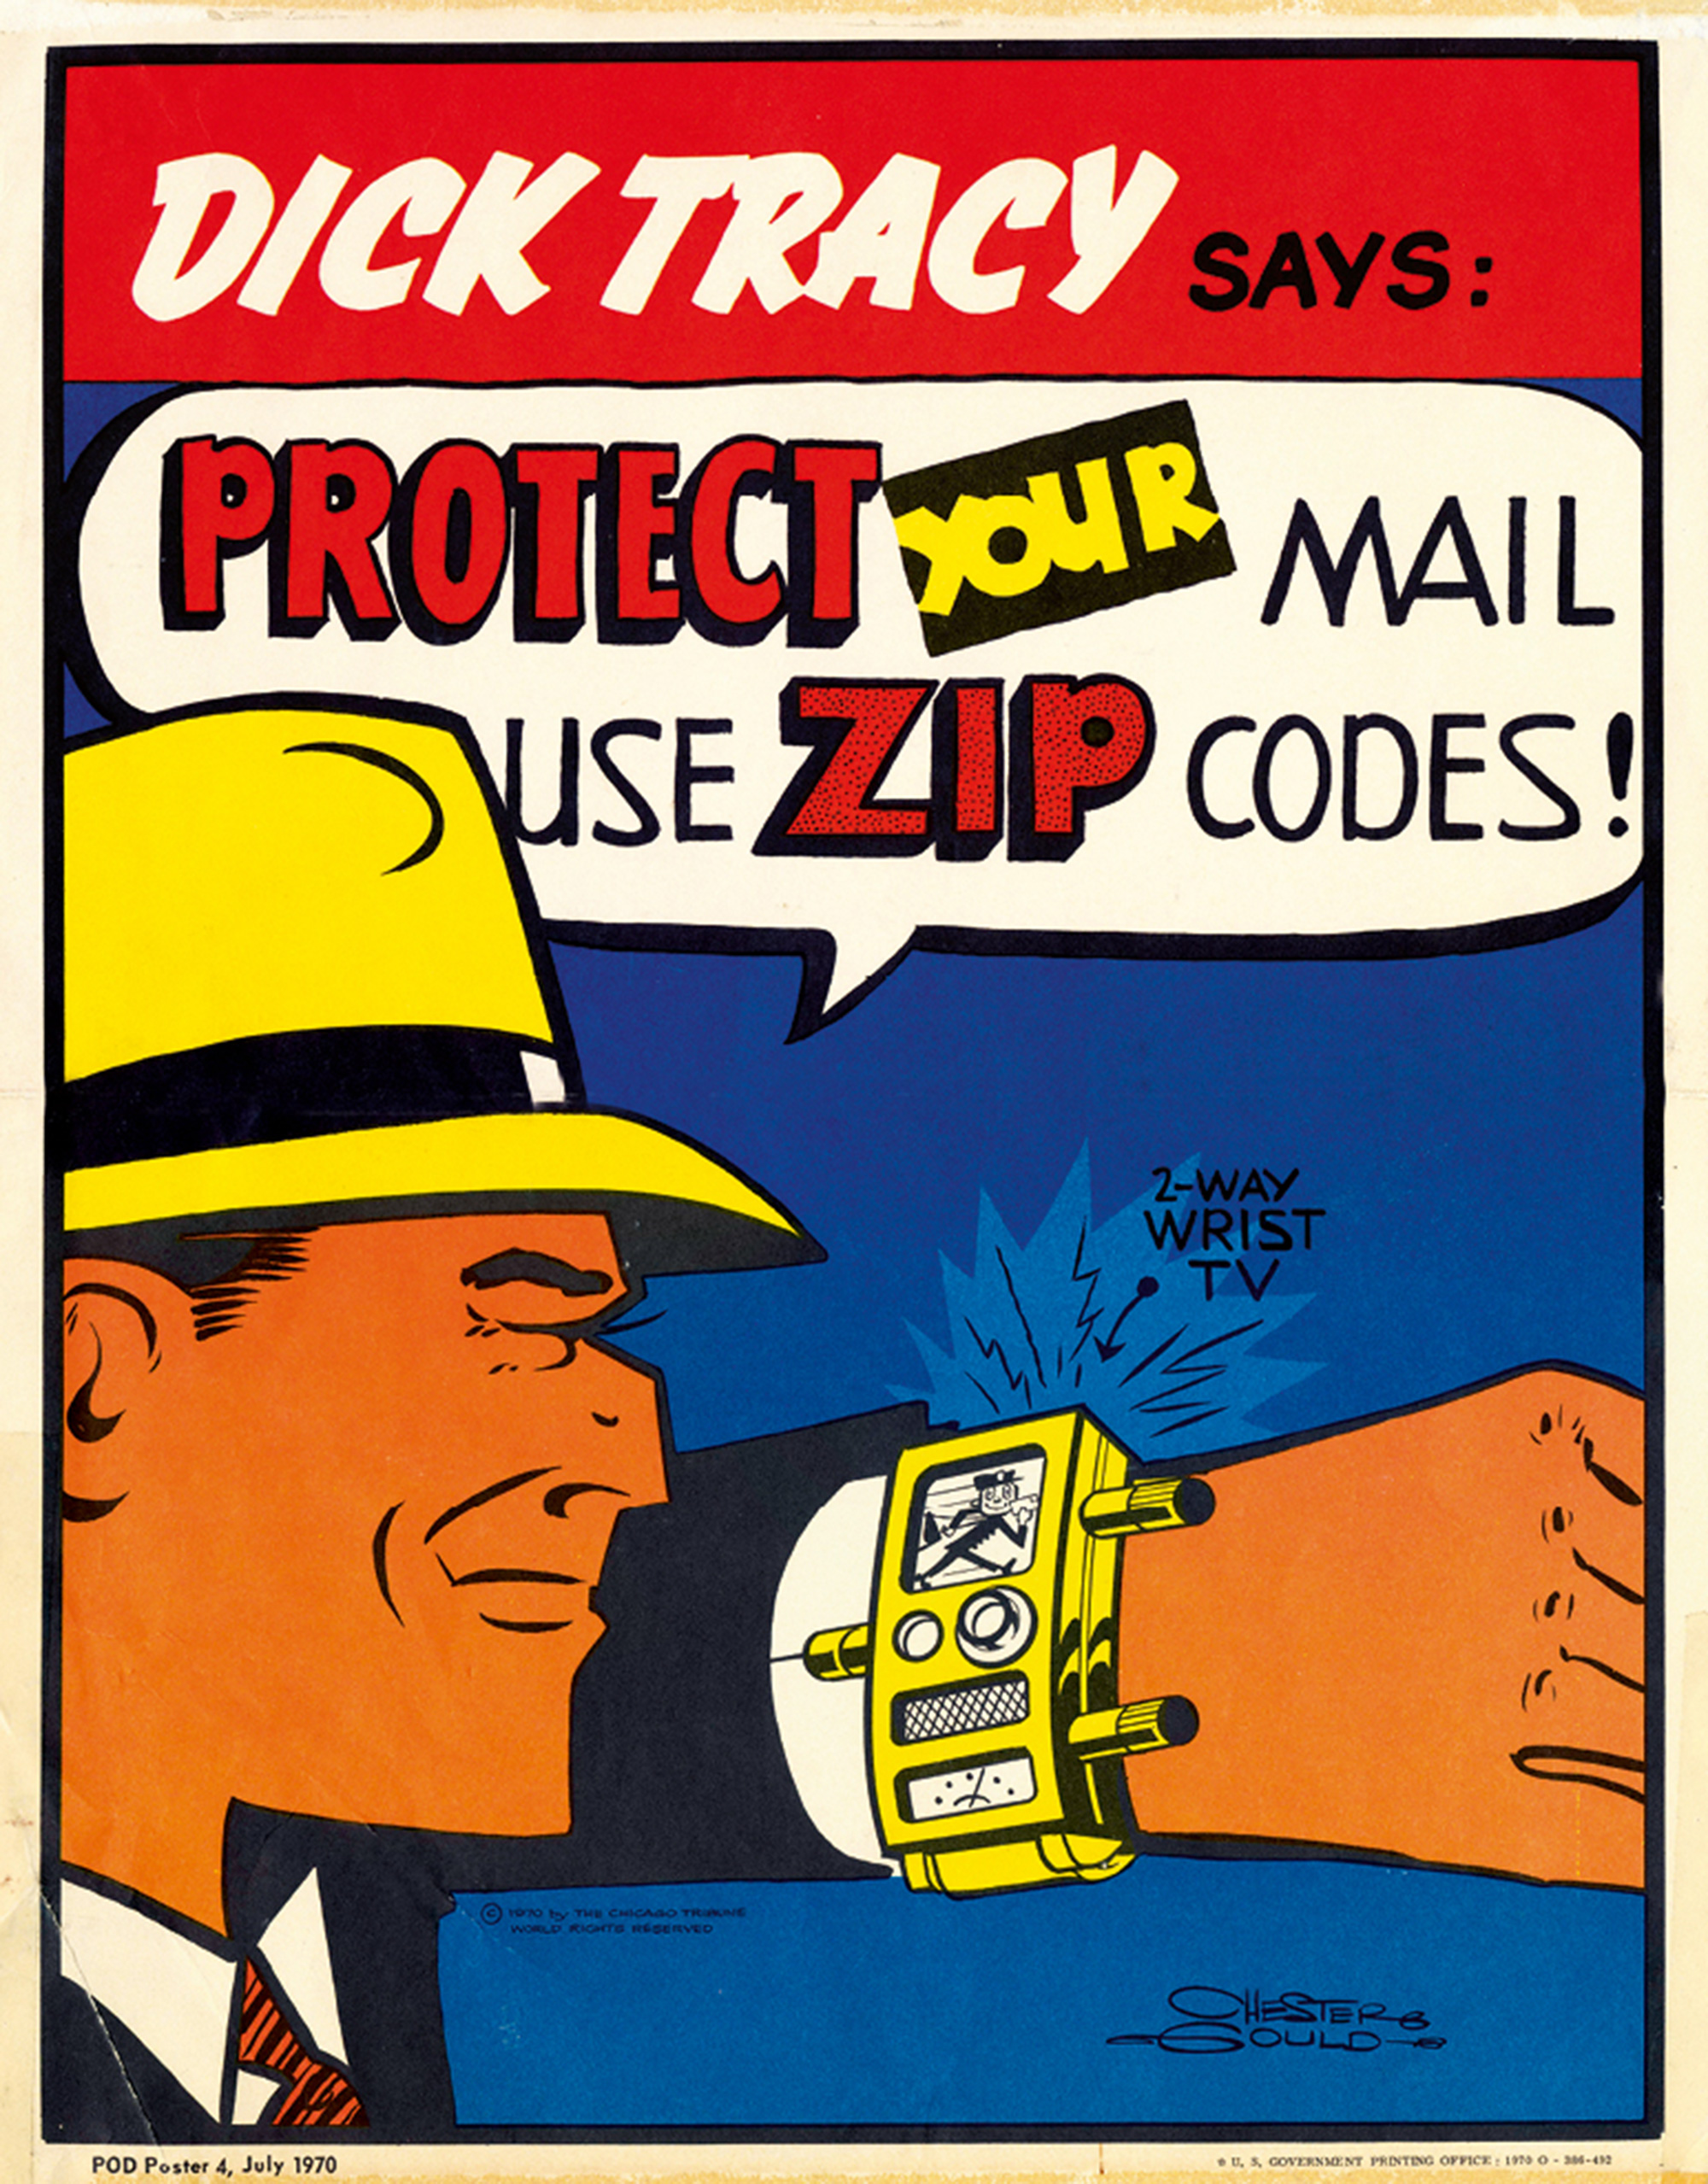 Mr. Zip appears on Dick Tracy’s famous 2-Way Wrist TV on a 1970 poster promoting the use of zip codes.